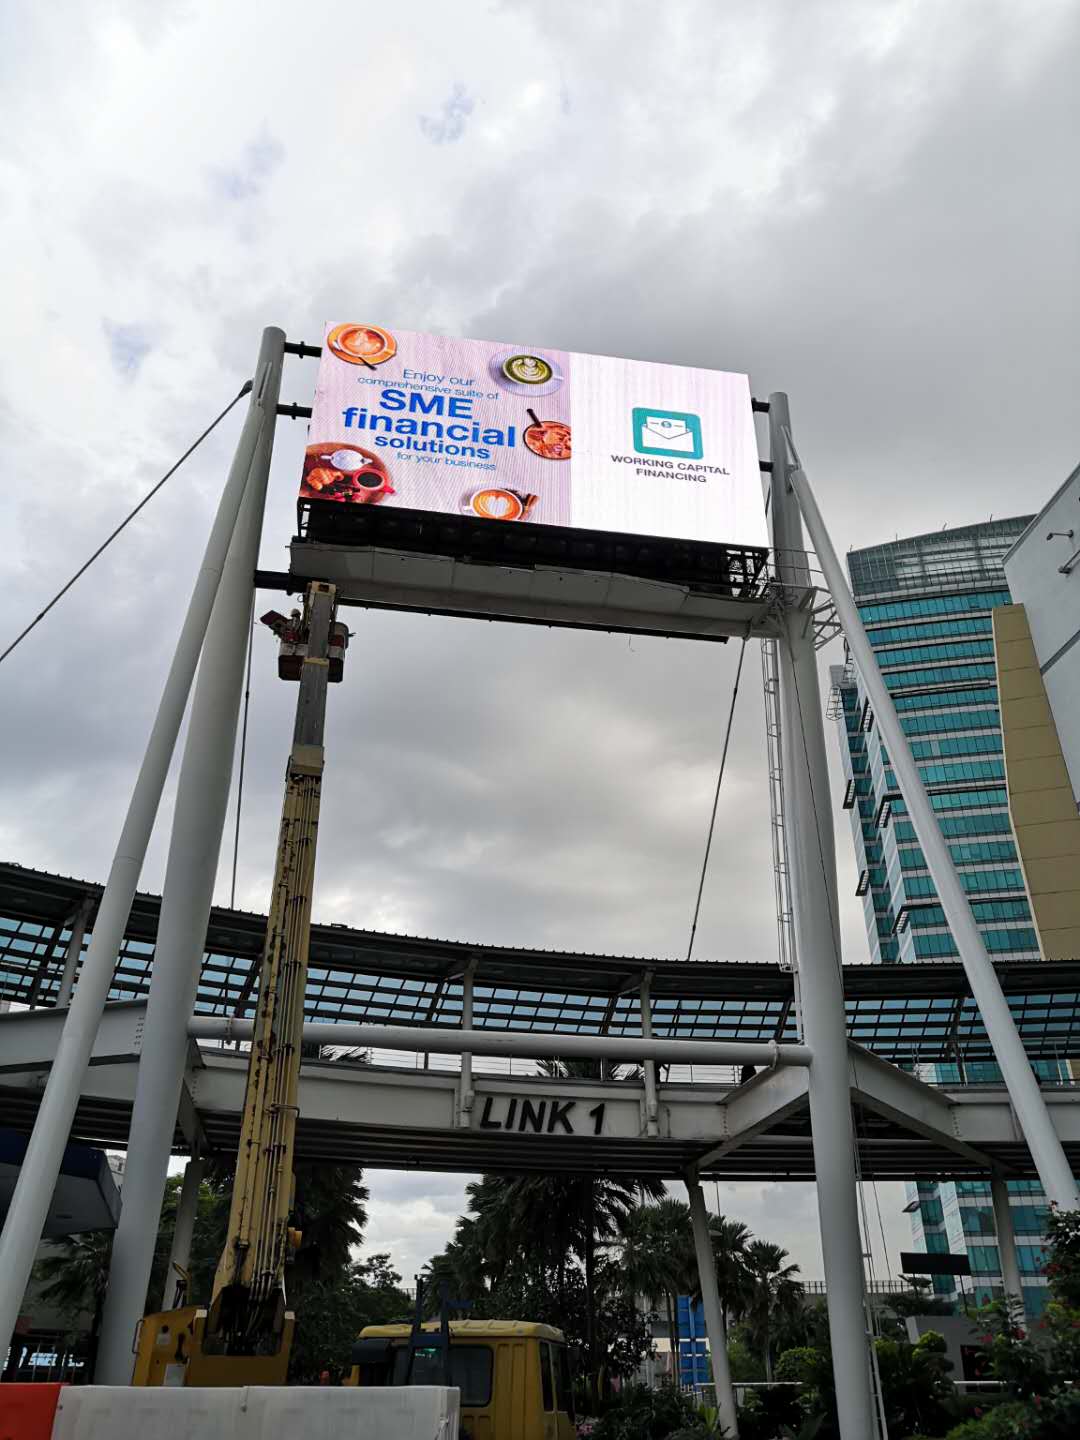 led-screen-digital-billboard-display-at-the-curve-kl-damansara-malaysia-double-sided-led-screen-full-color3_orig